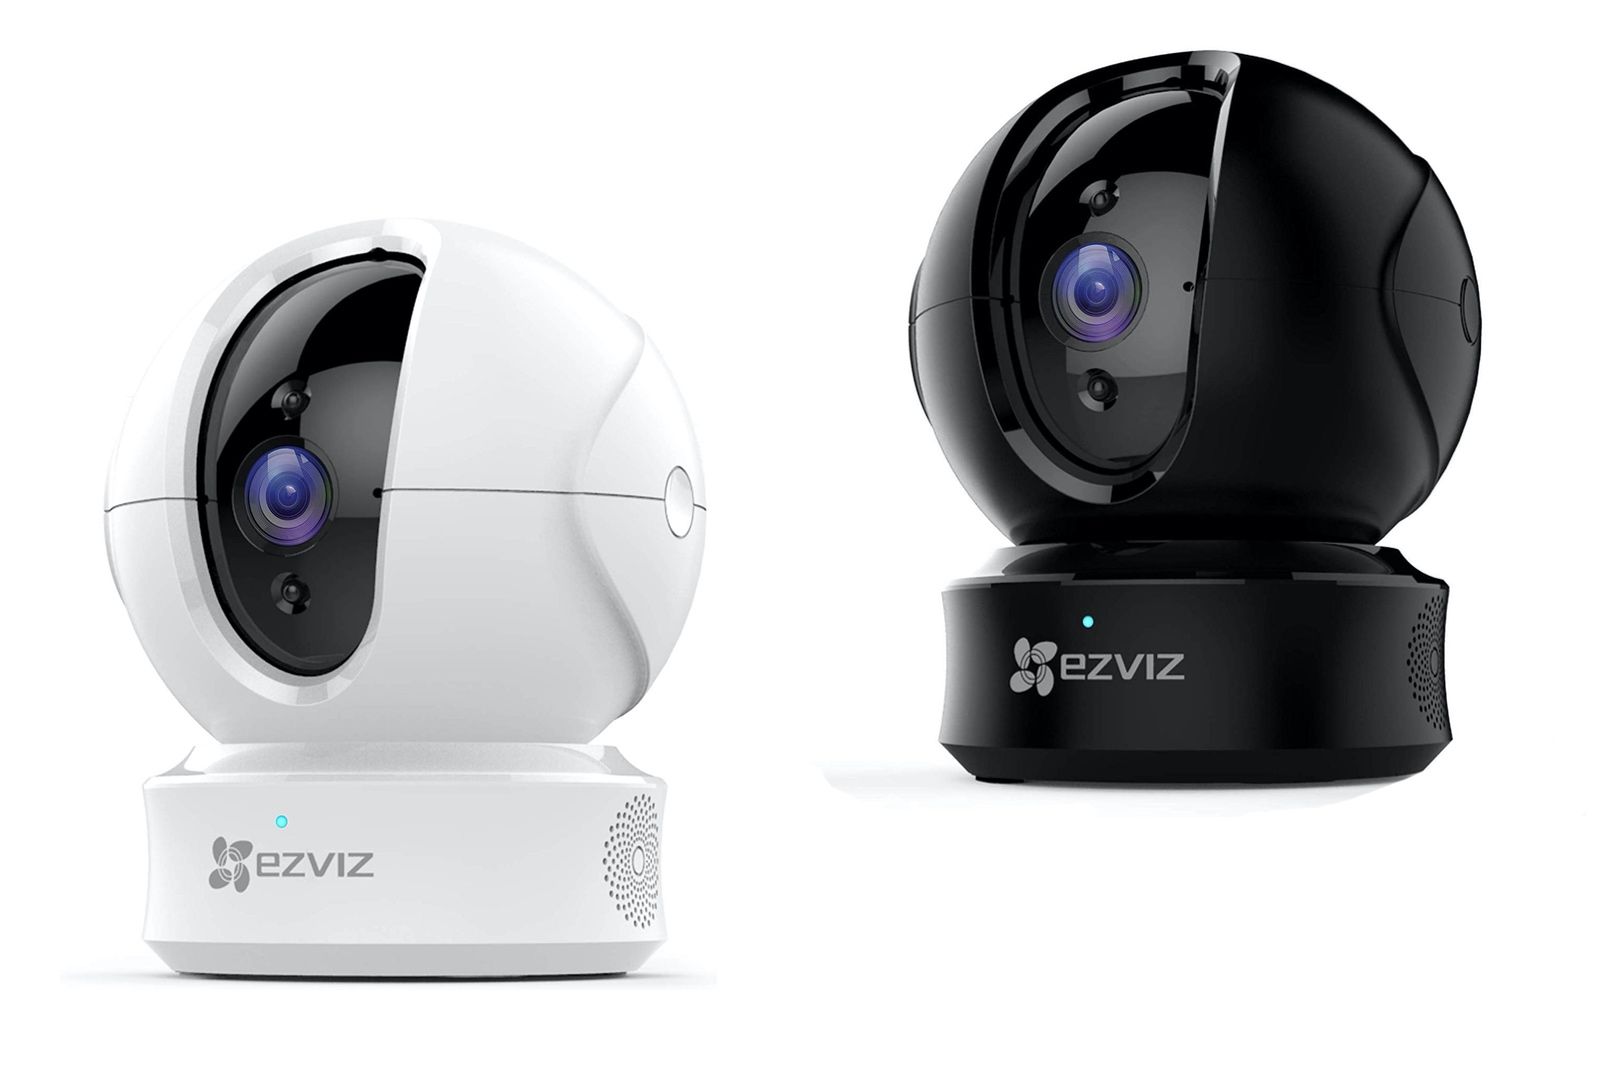 The Best Deals On Home Security Cameras From Ezviz image 3